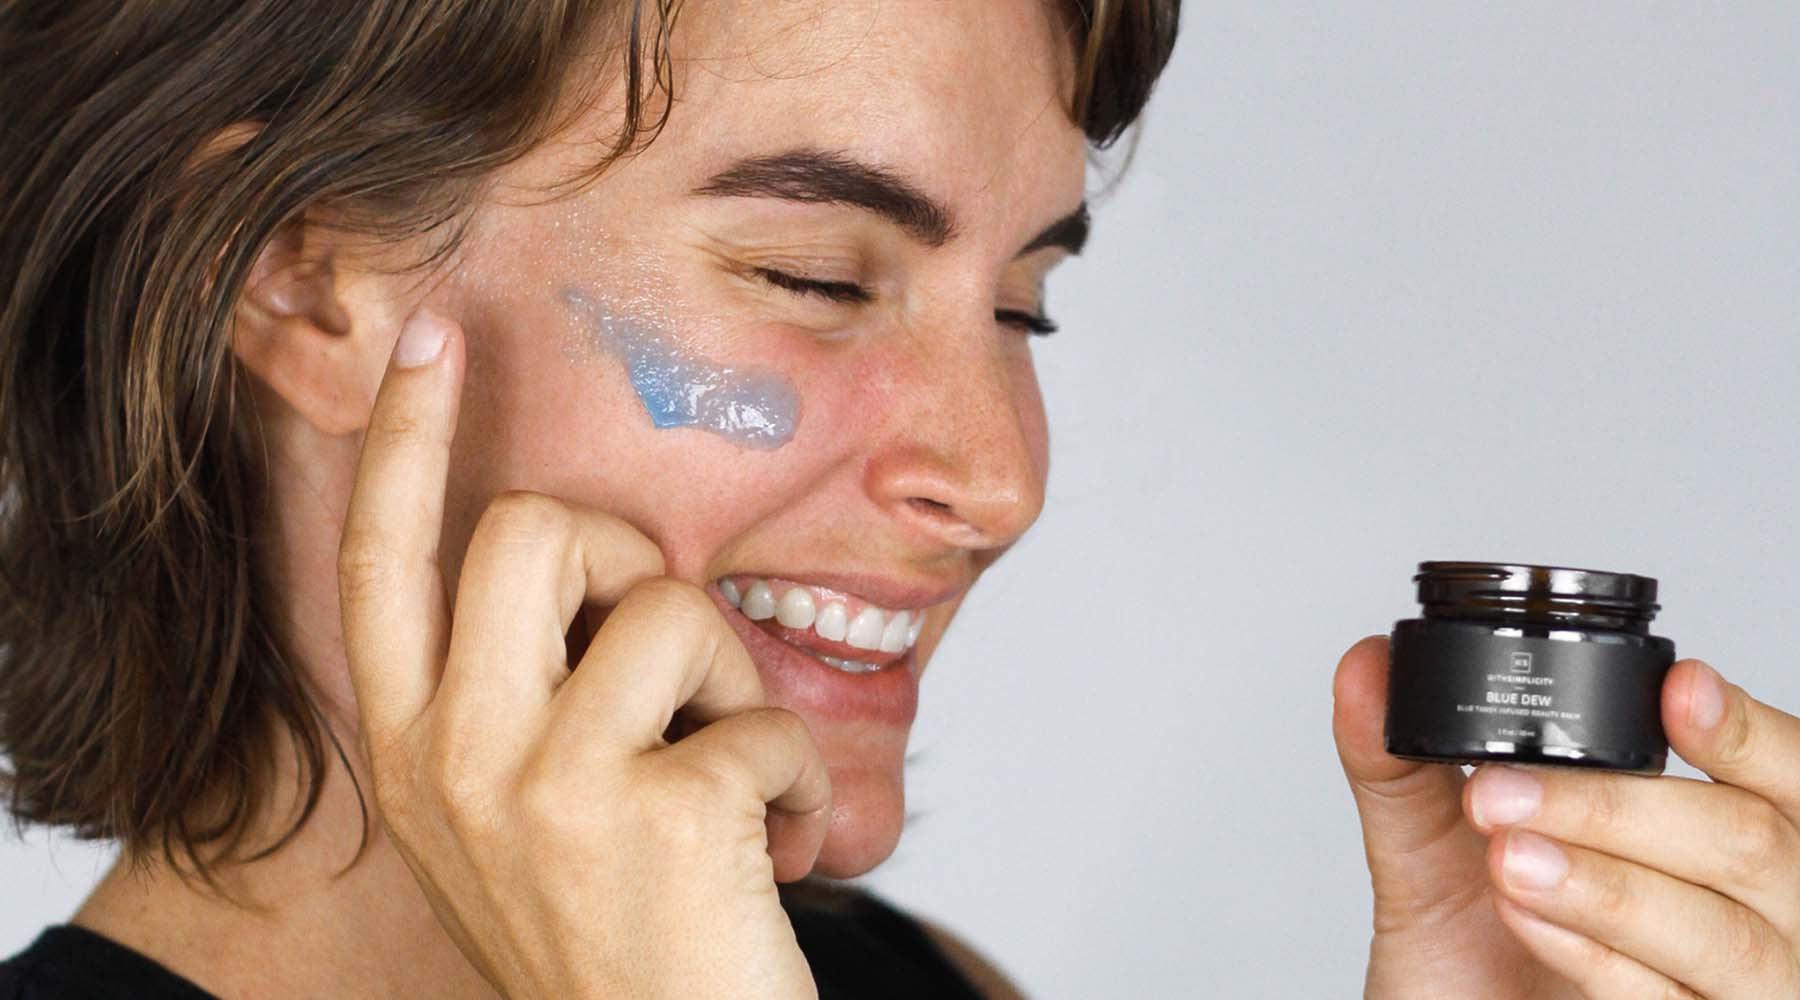 Woman applying withSimplicity Blue Dew Facial Moisturizer